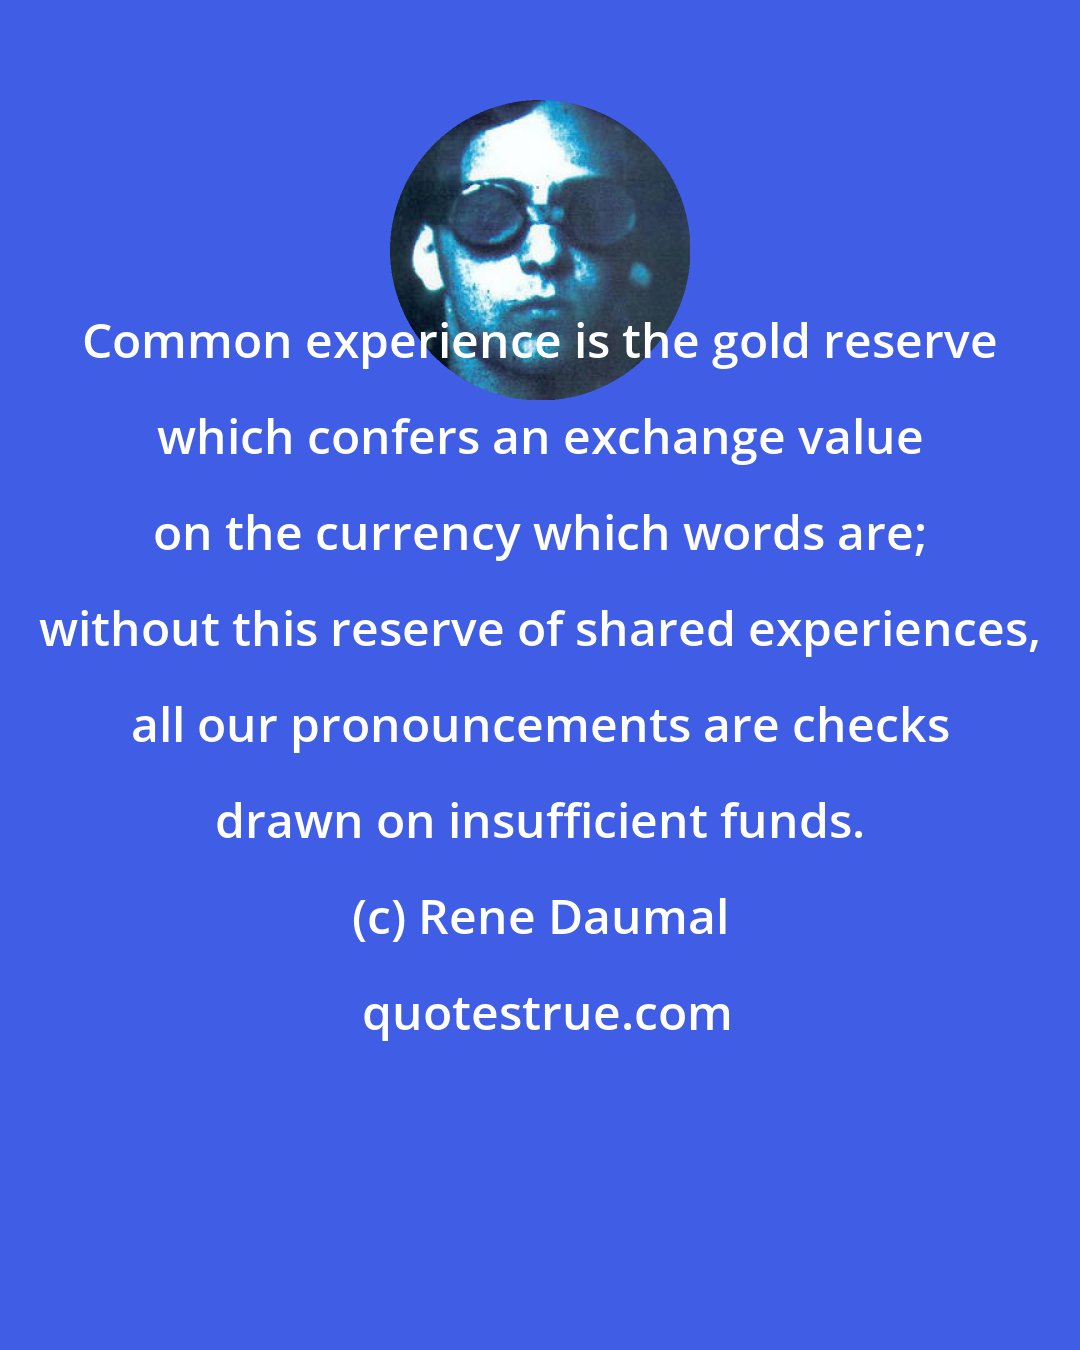 Rene Daumal: Common experience is the gold reserve which confers an exchange value on the currency which words are; without this reserve of shared experiences, all our pronouncements are checks drawn on insufficient funds.